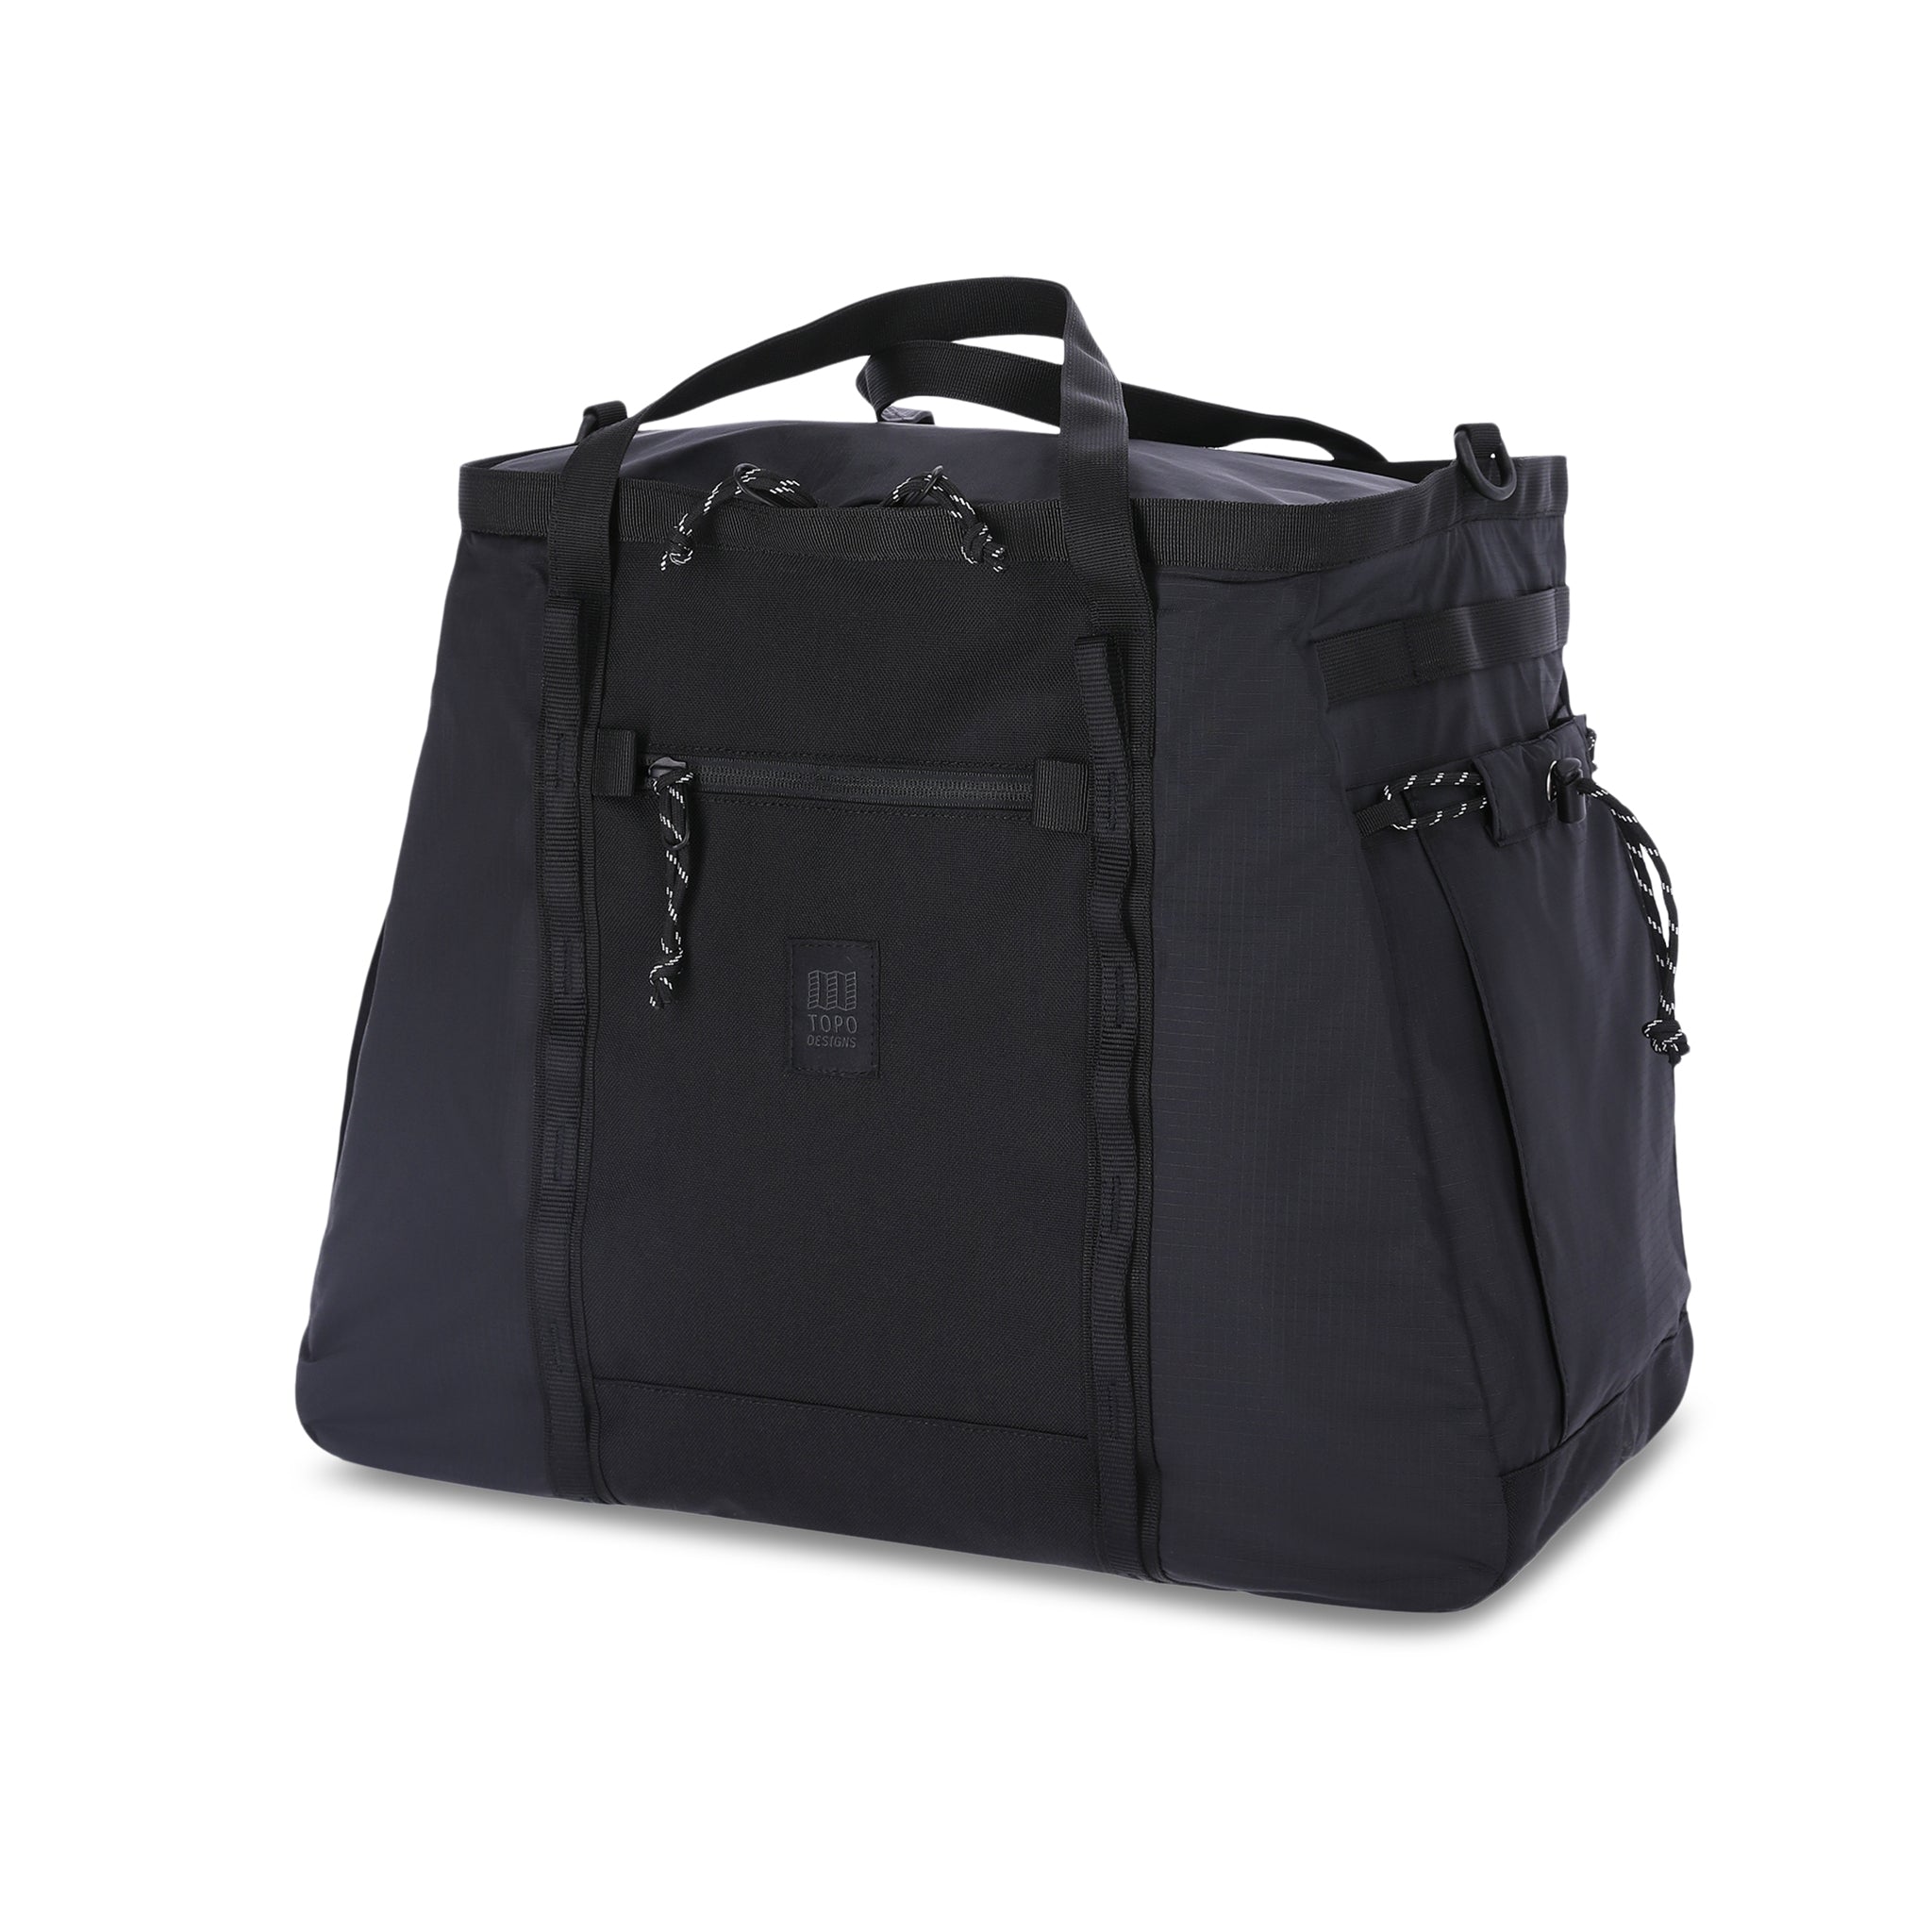 Topo Designs Mountain Gear Bag tote hauler in lightweight recycled "Black" nylon.